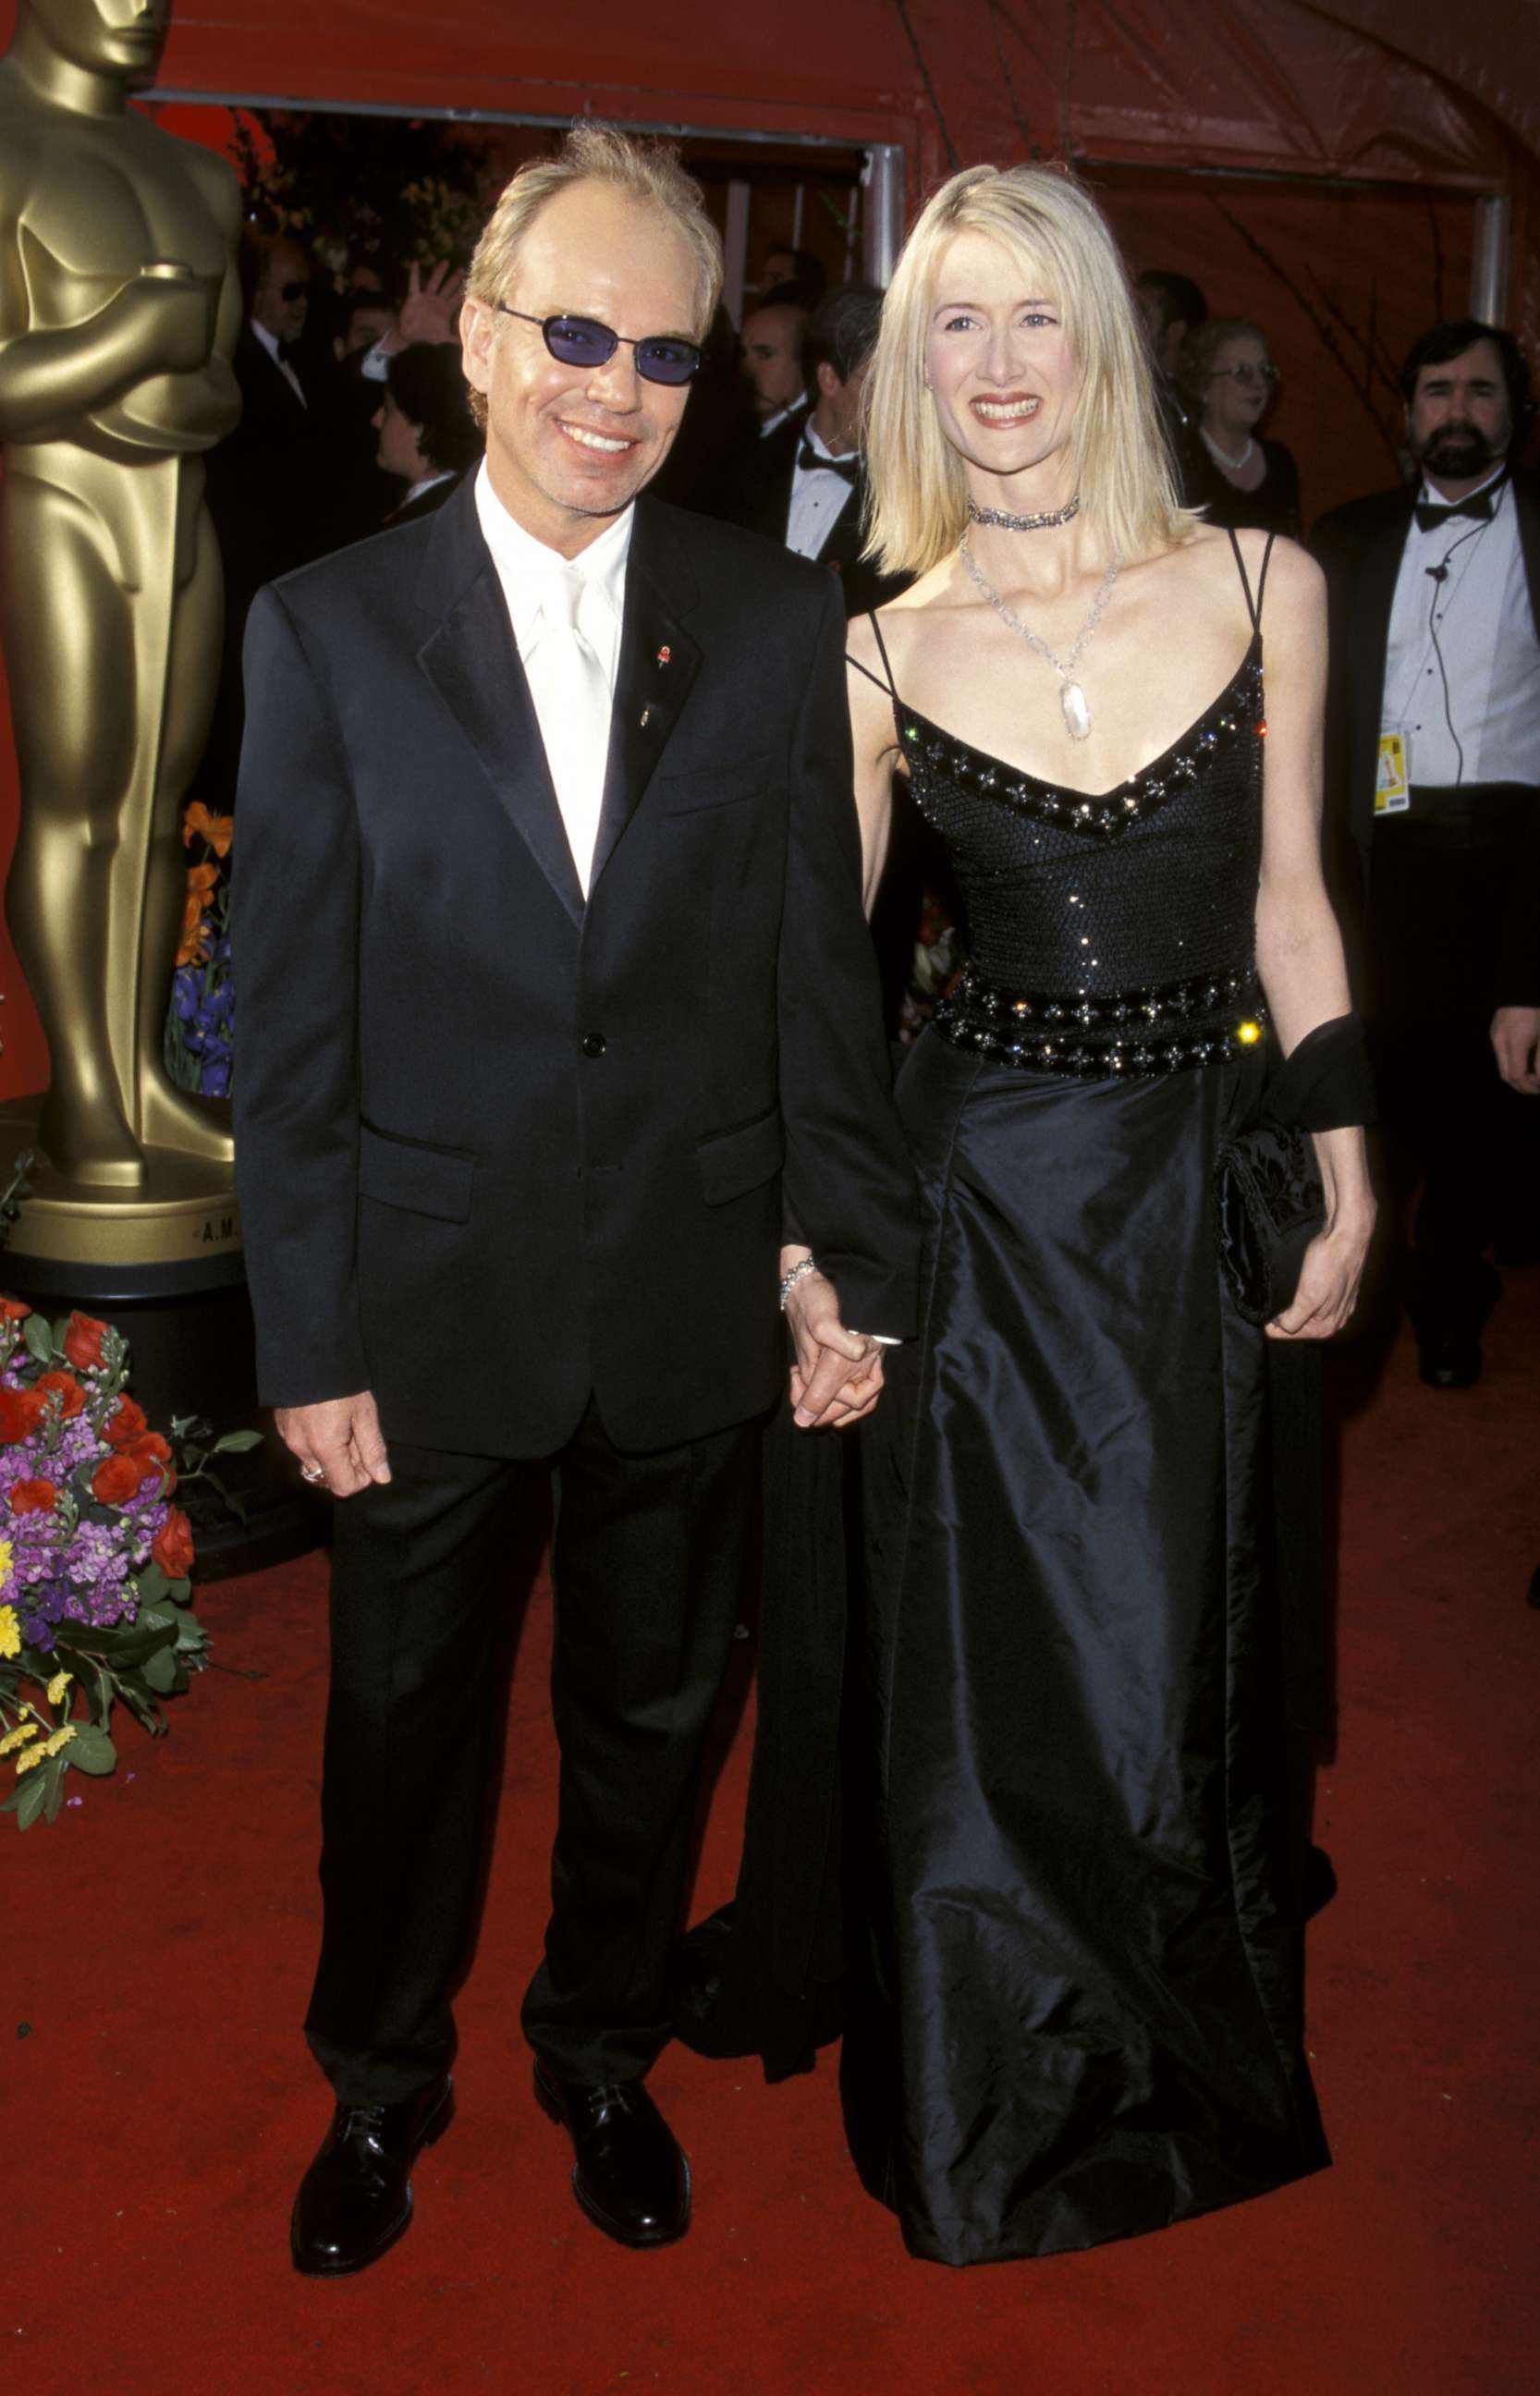 PHOTO: Billy Bob Thronton and Laura Dern arrive for the 71st Annual Academy Awards at Dorothy Chandler Pavilion in Los Angeles, March 21, 1999.